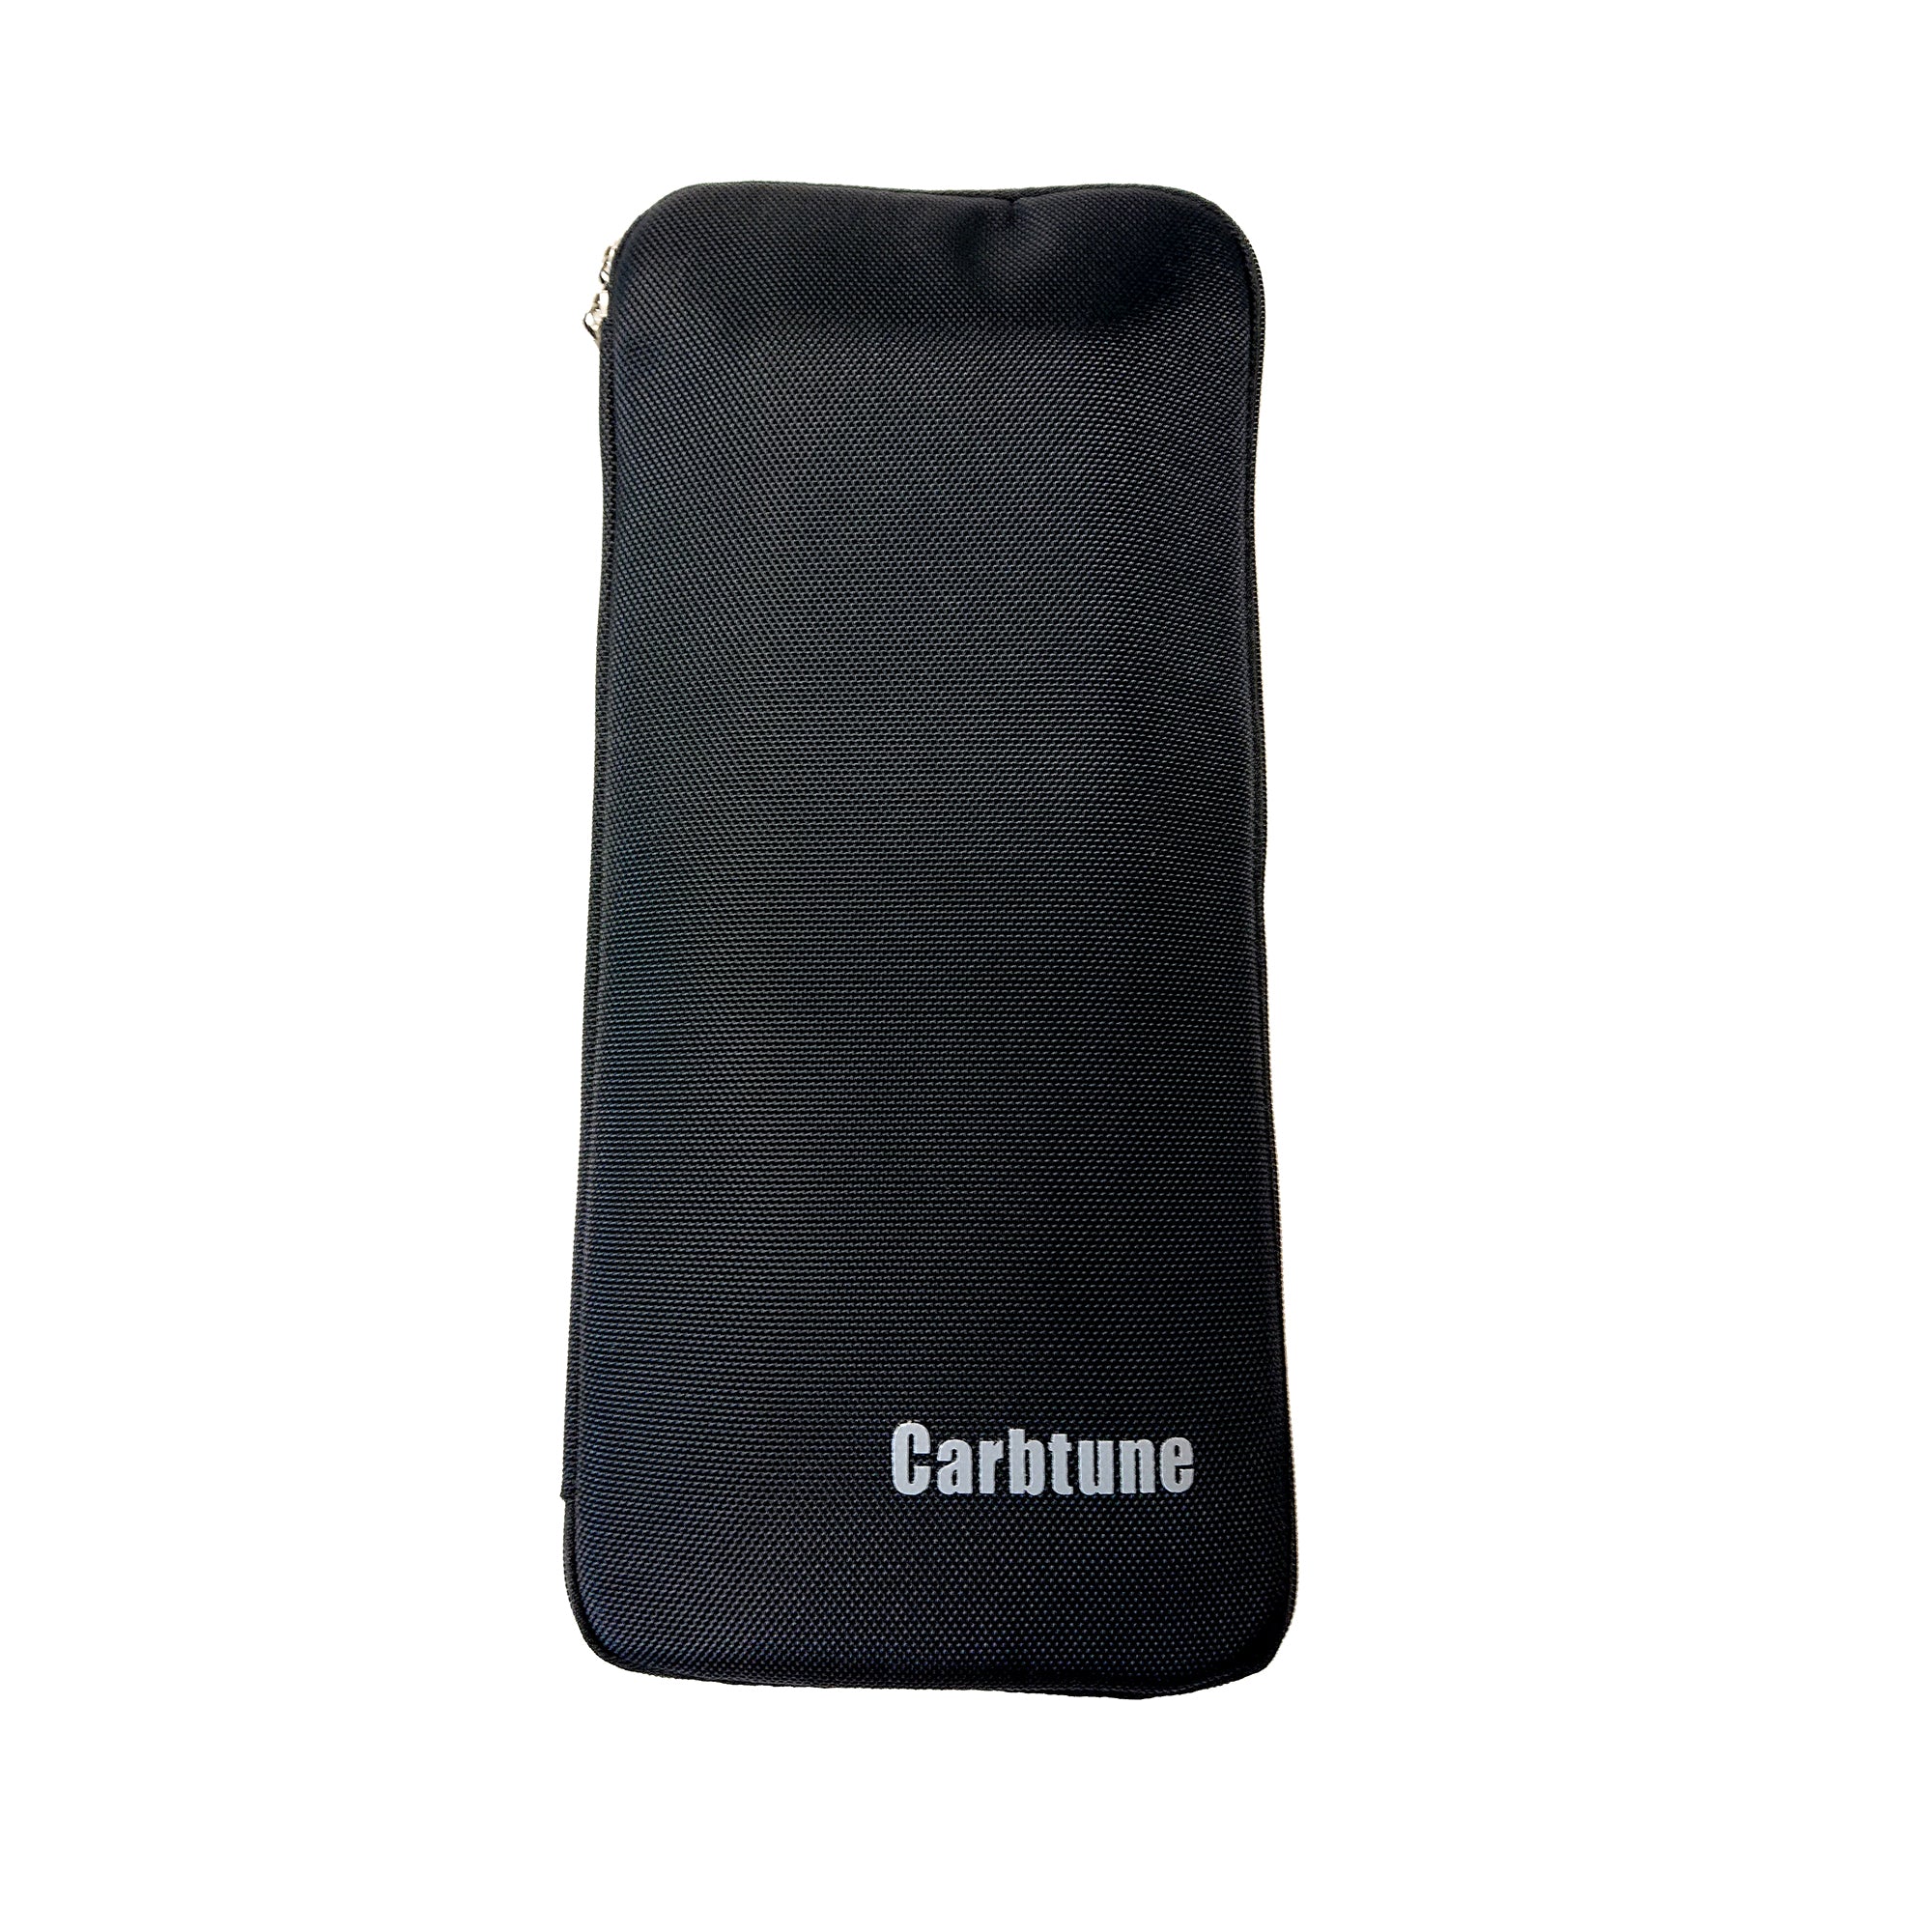 Carbtune Pro Synchronization Tool with Case